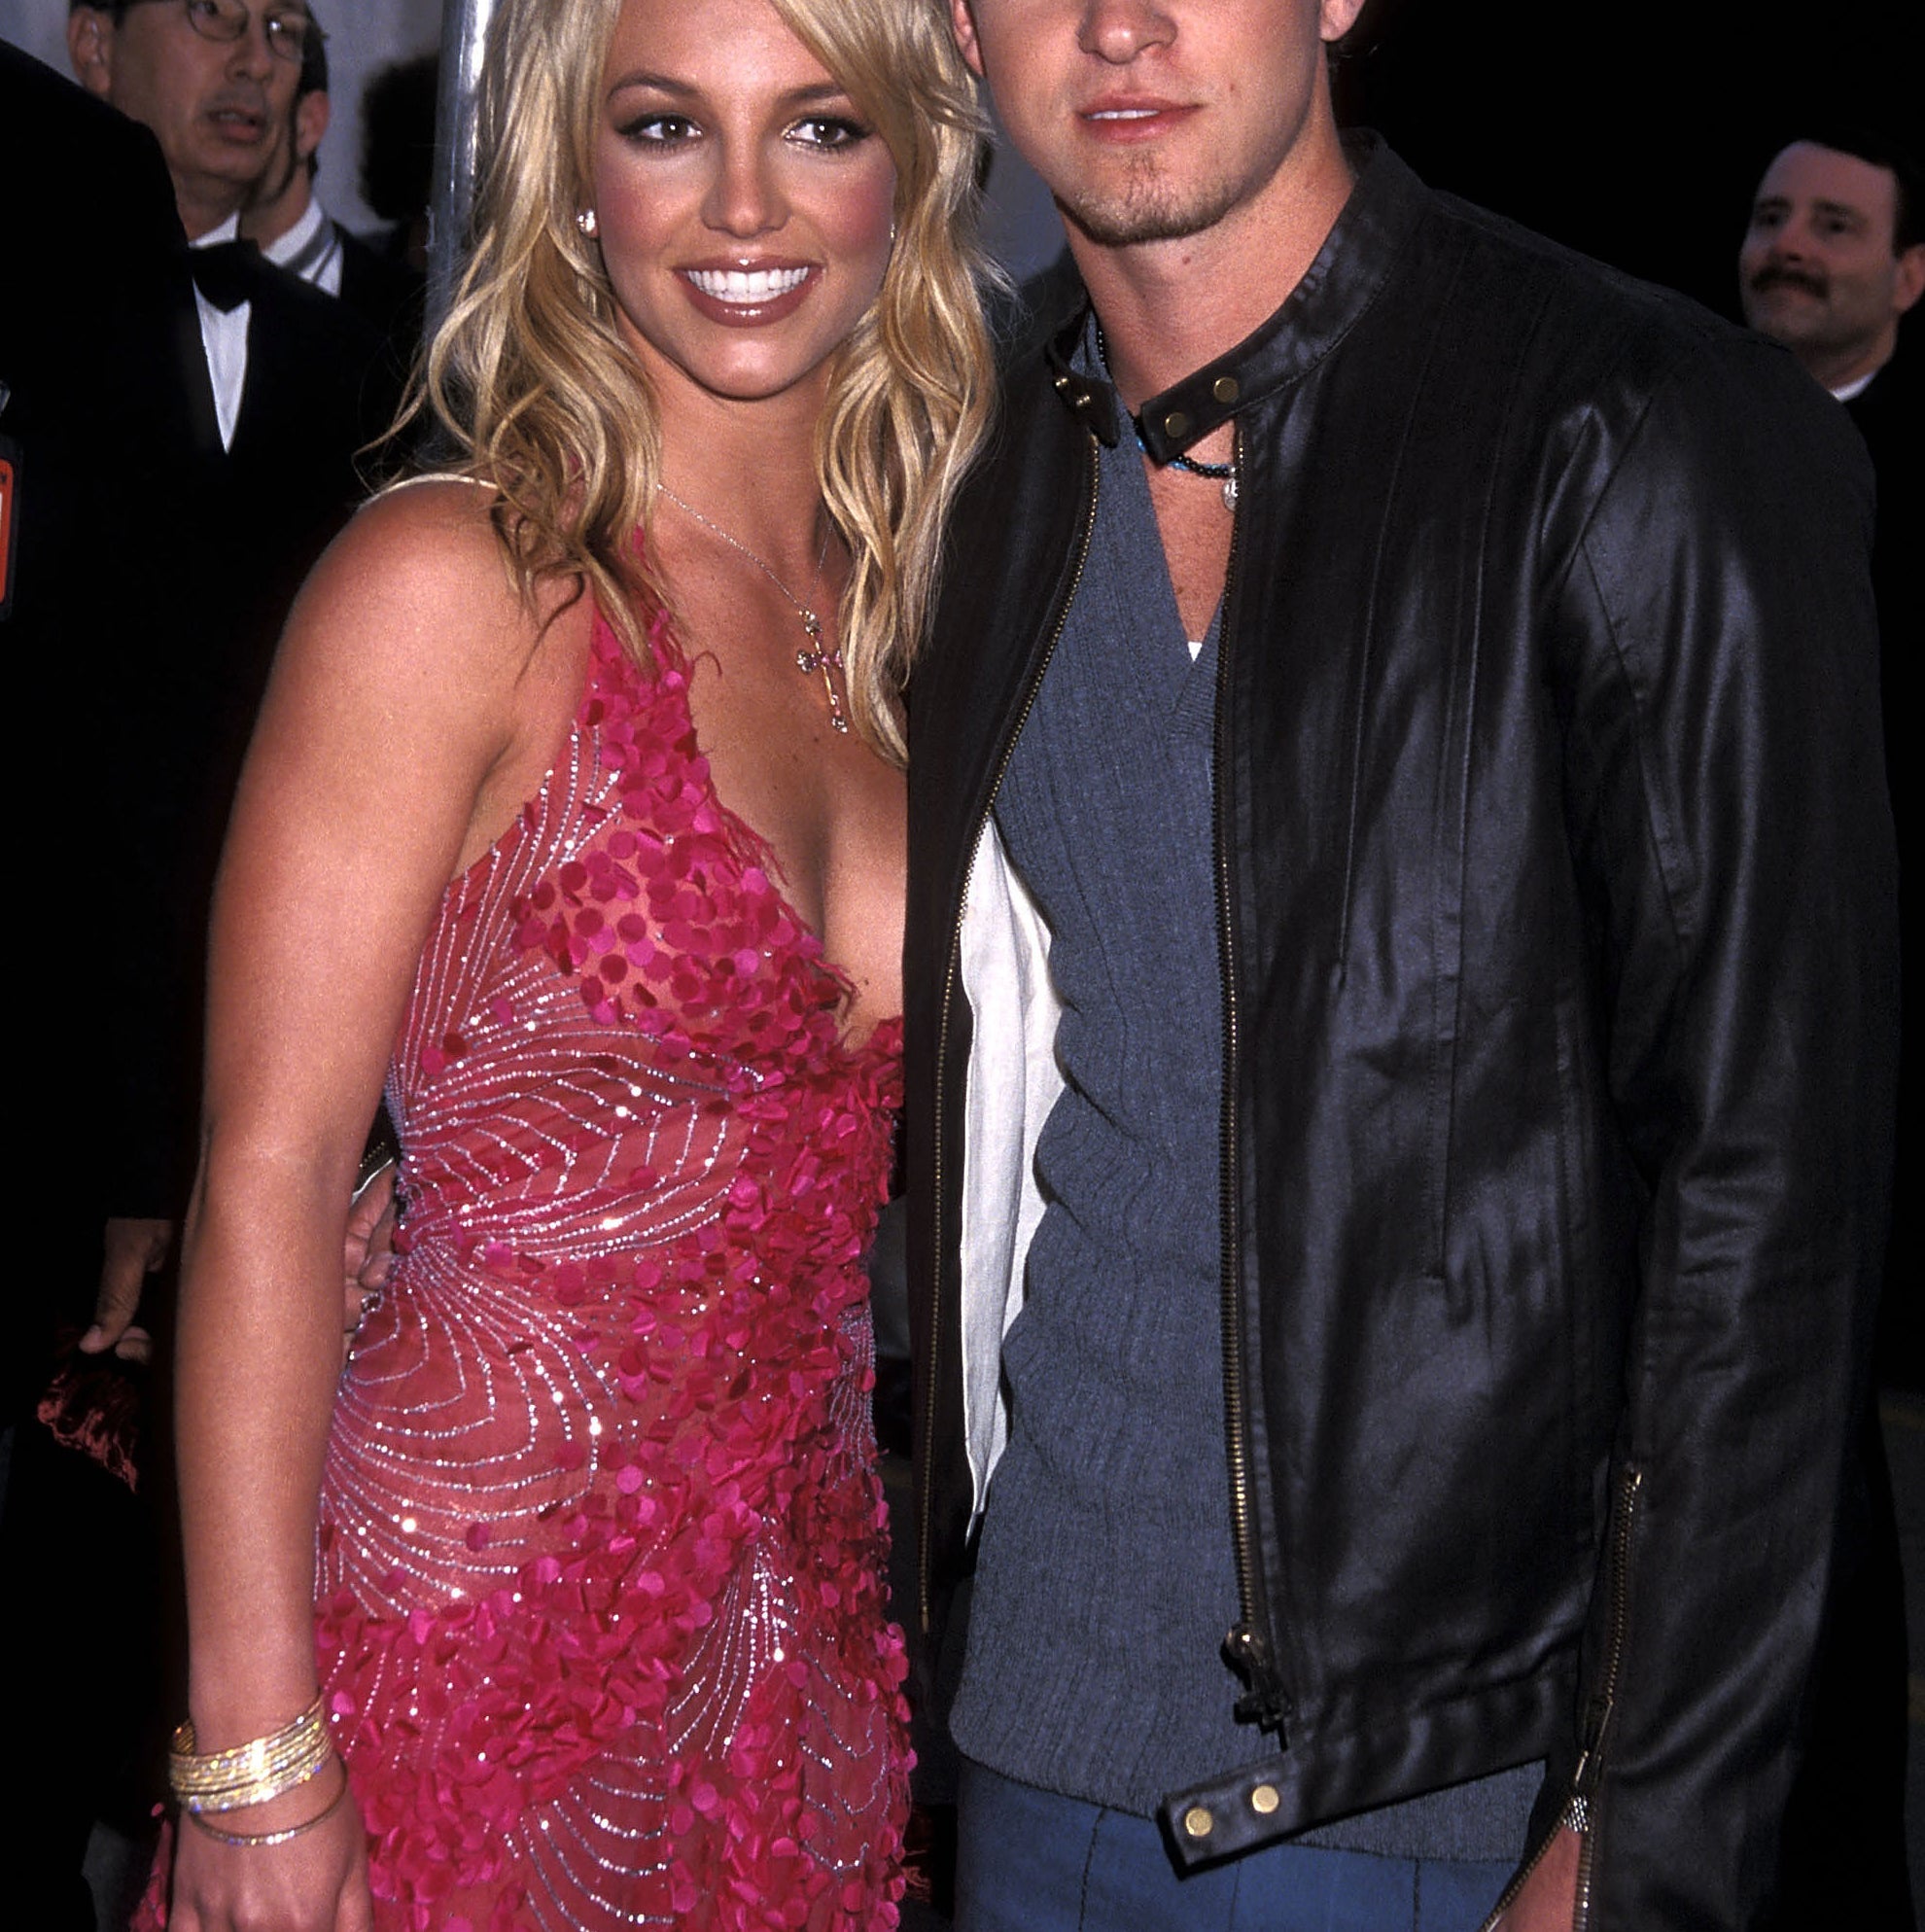 Justin Timberlake and Britney Spears smiling for photographers at an event